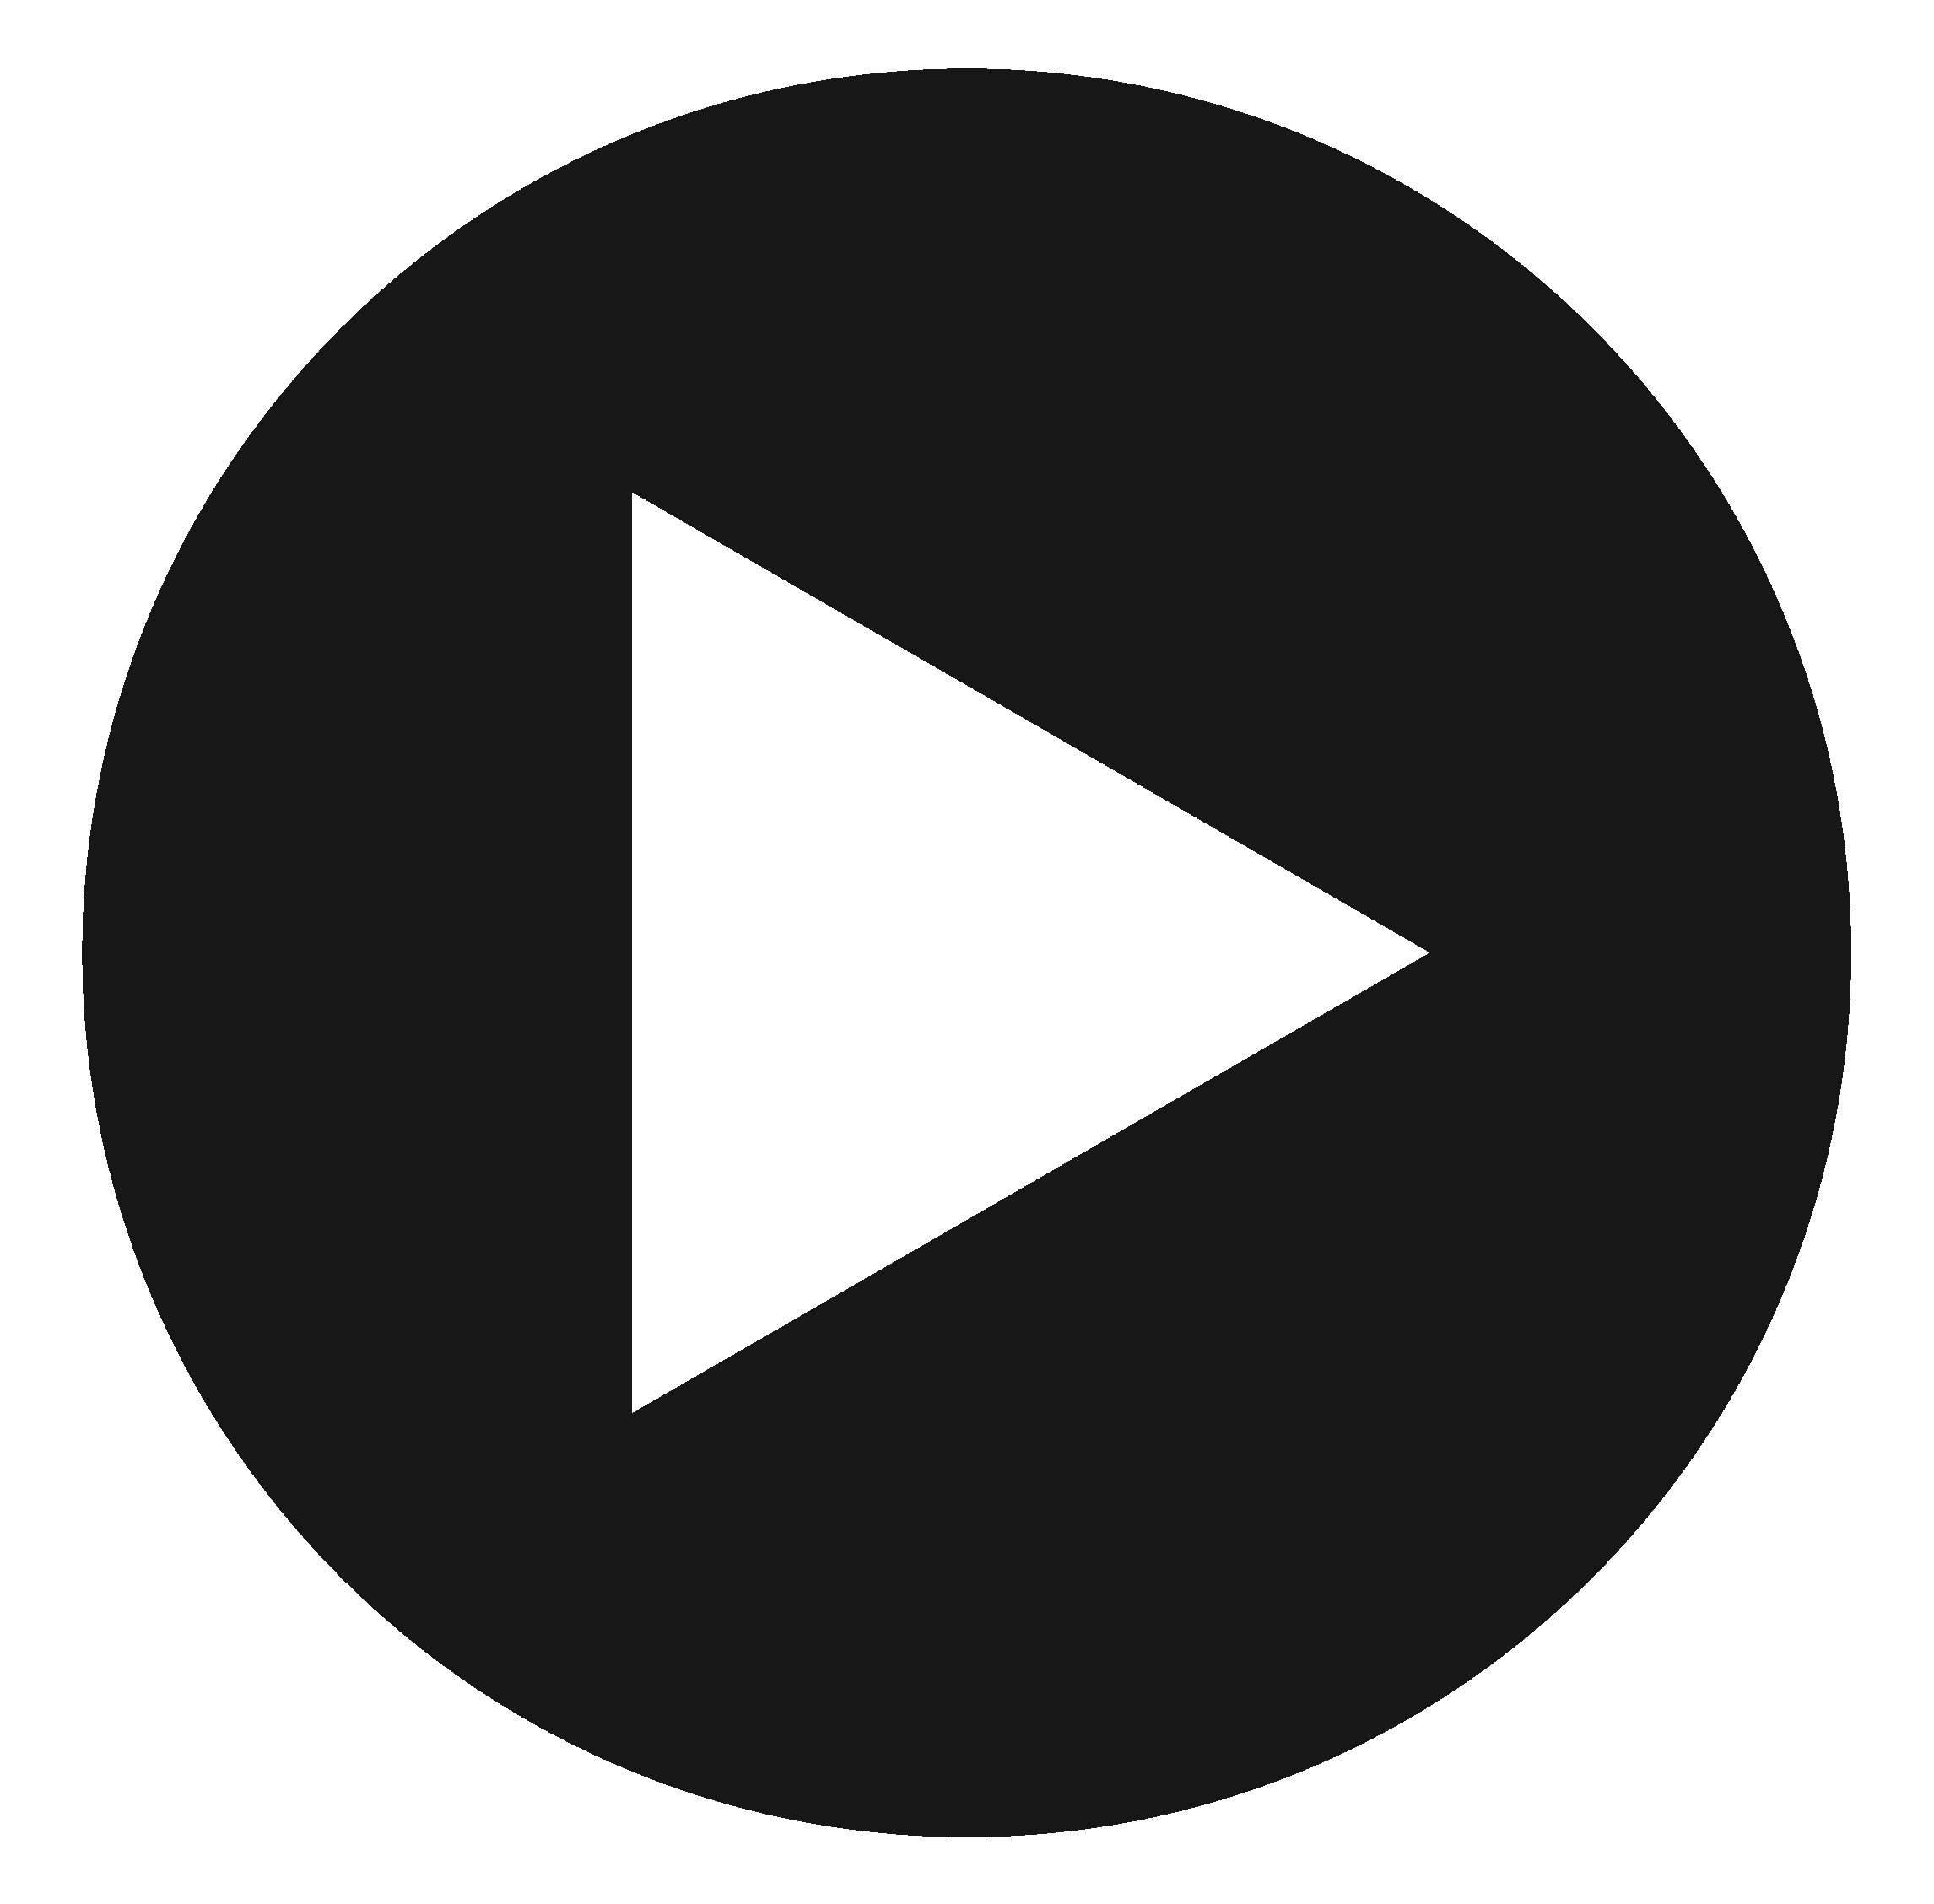 Image gallery for : play button png transparent